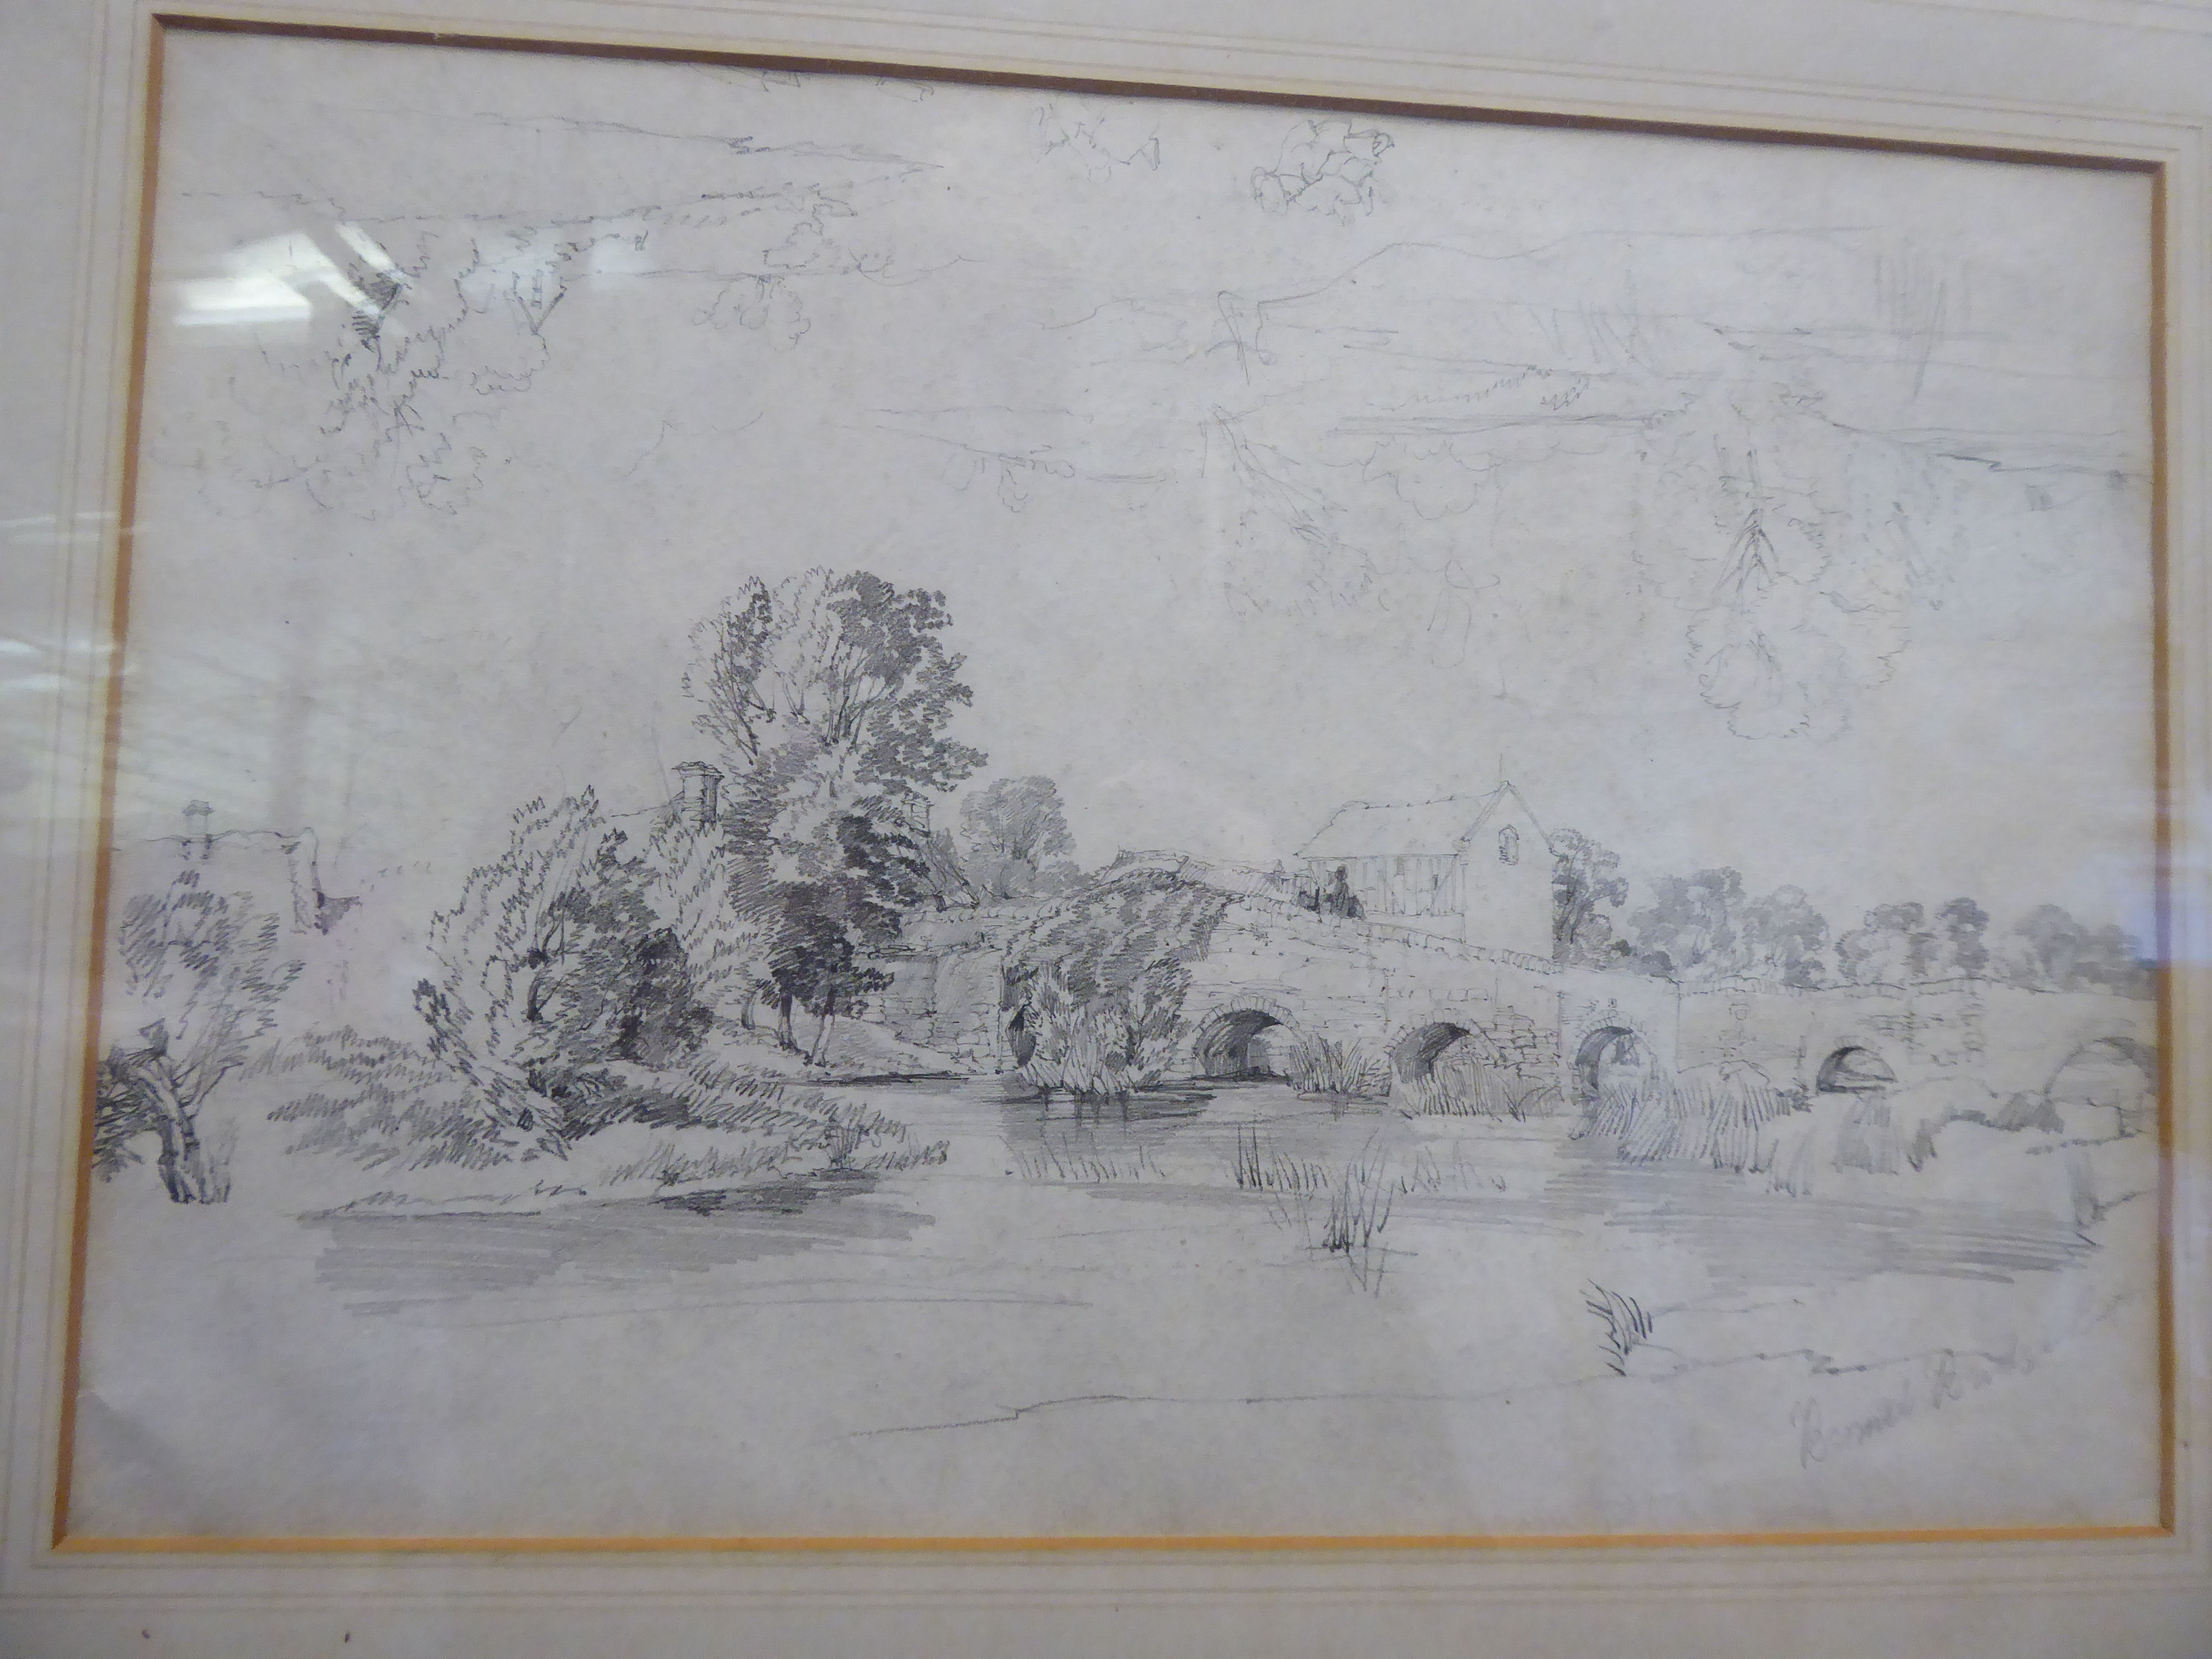 Attributed to James Duffield Hardy - 'Barnet Bridge' pencil studies 9'' x 13'' framed - Image 4 of 4